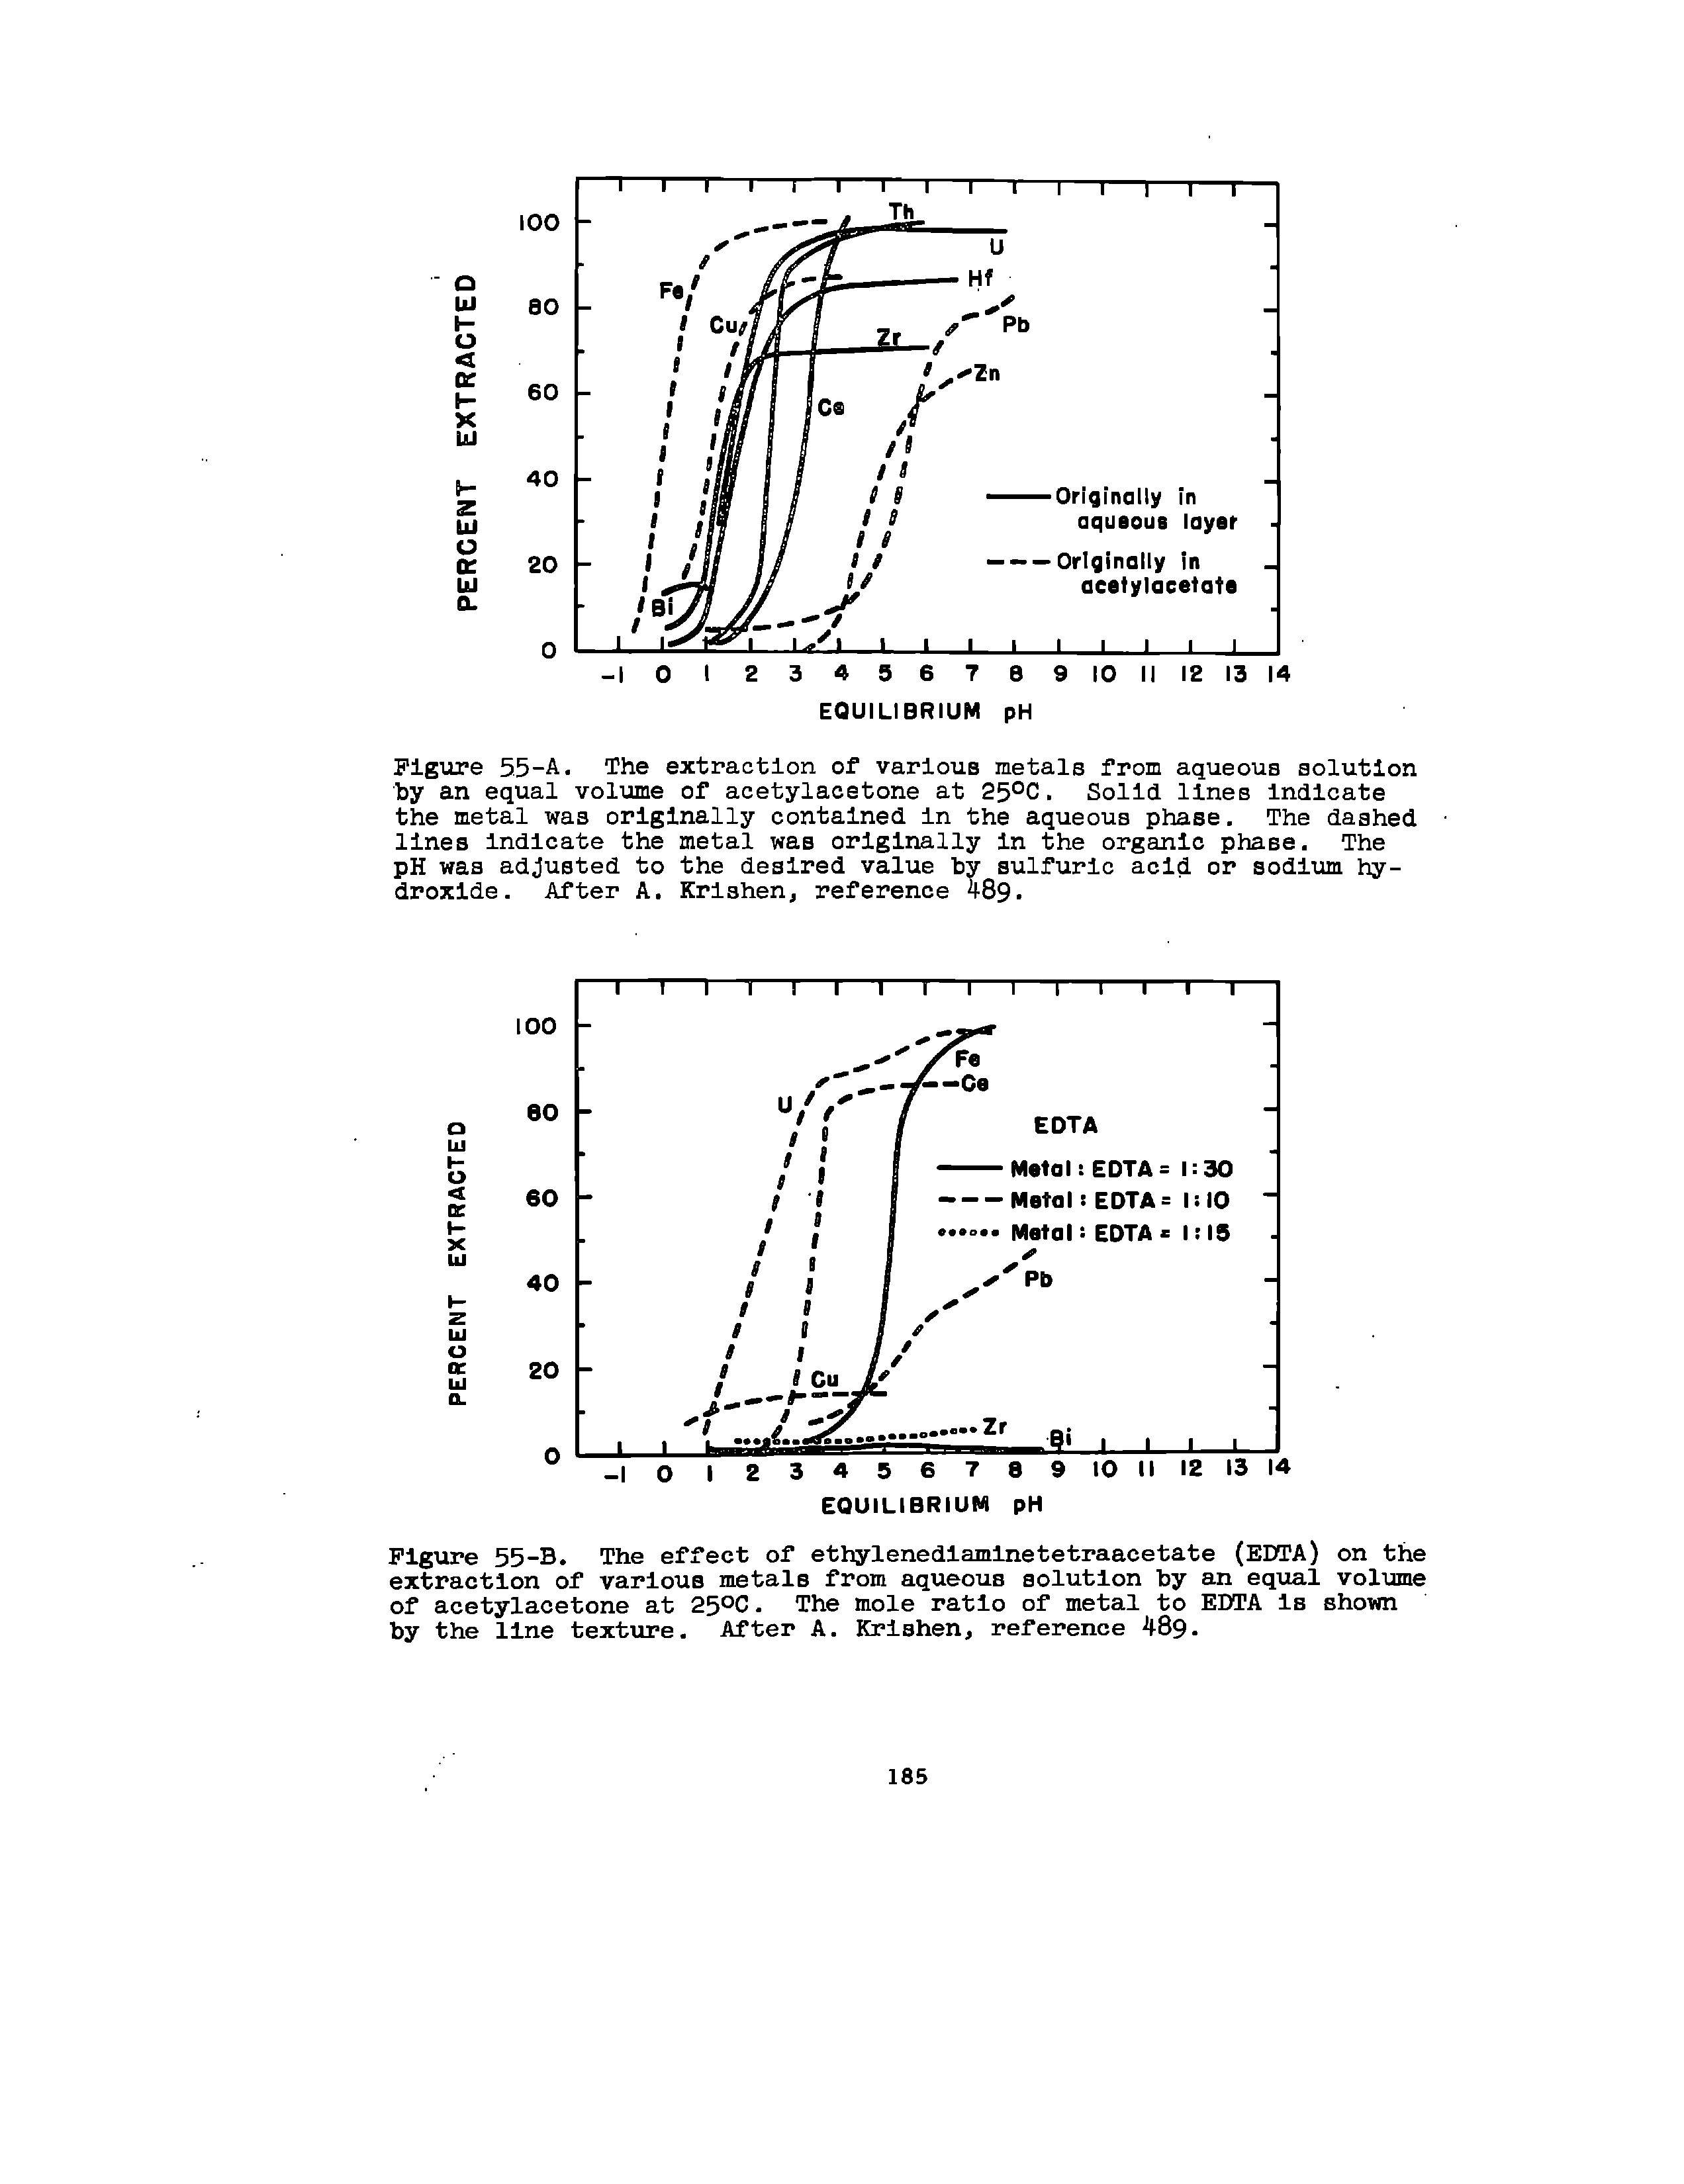 Figure 55-B. The effect of ethylenedlamlnetetraacetate (EDTA) on the extraction of various metals from aqueous solution by an equal volume of acetylacetone at 25°C. The mole ratio of metal to EDTA Is shown by the line texture. After A. Krlshen, reference 489.